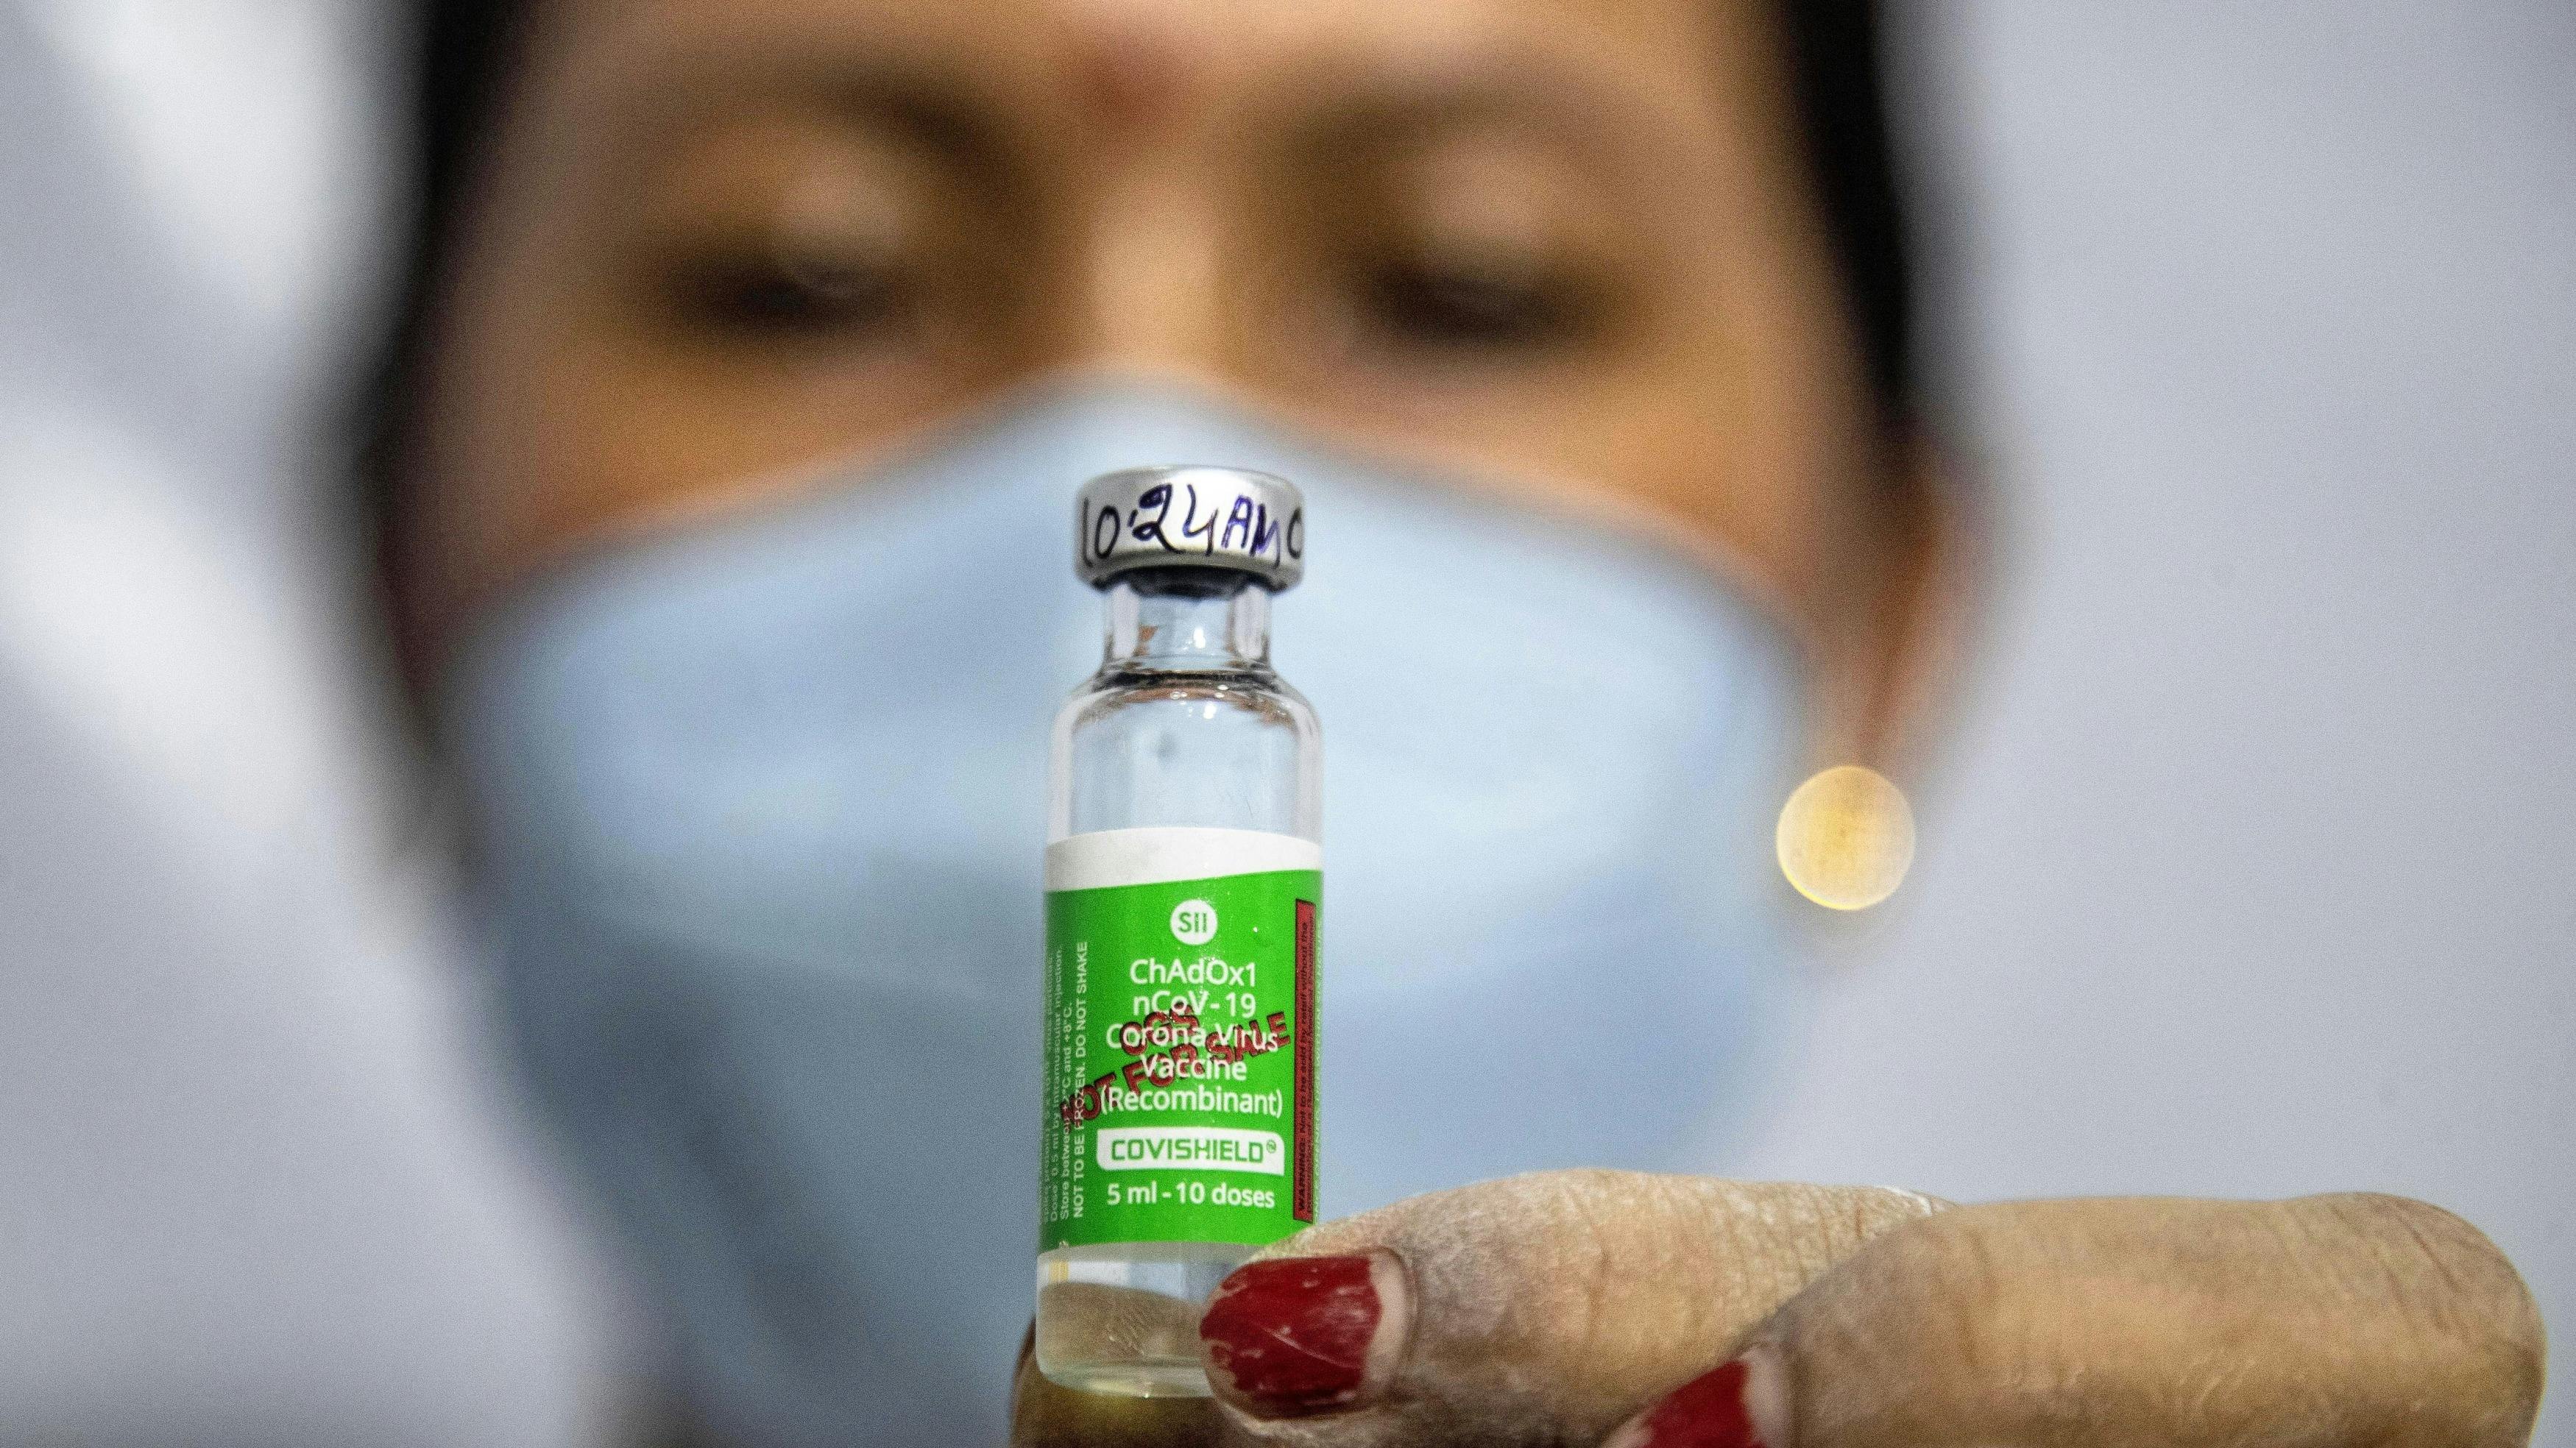 India’s vaccine disaster shows priorities of the rich